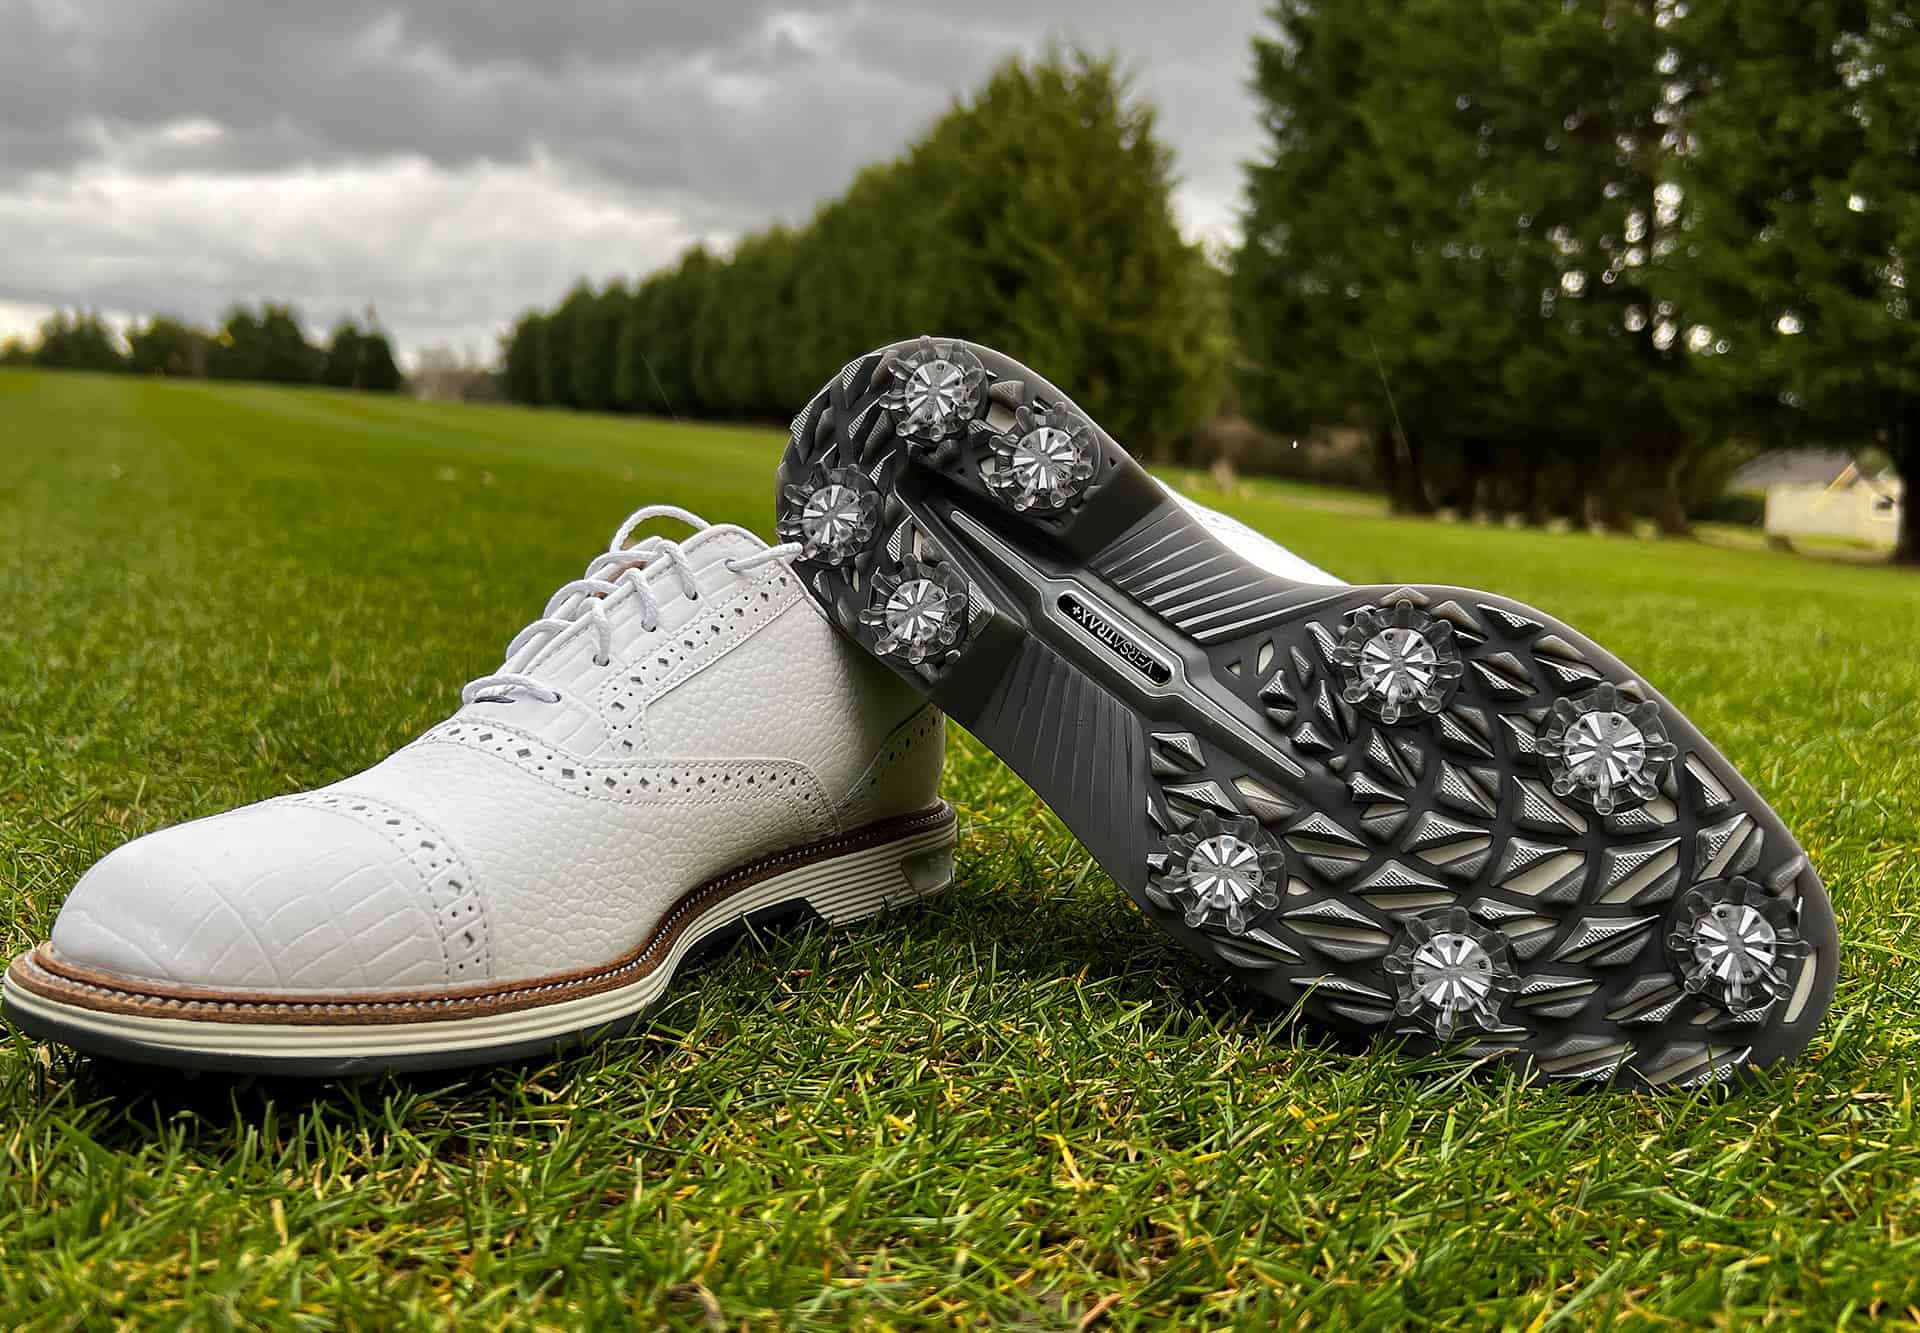 Best Spiked Golf Shoes 2023